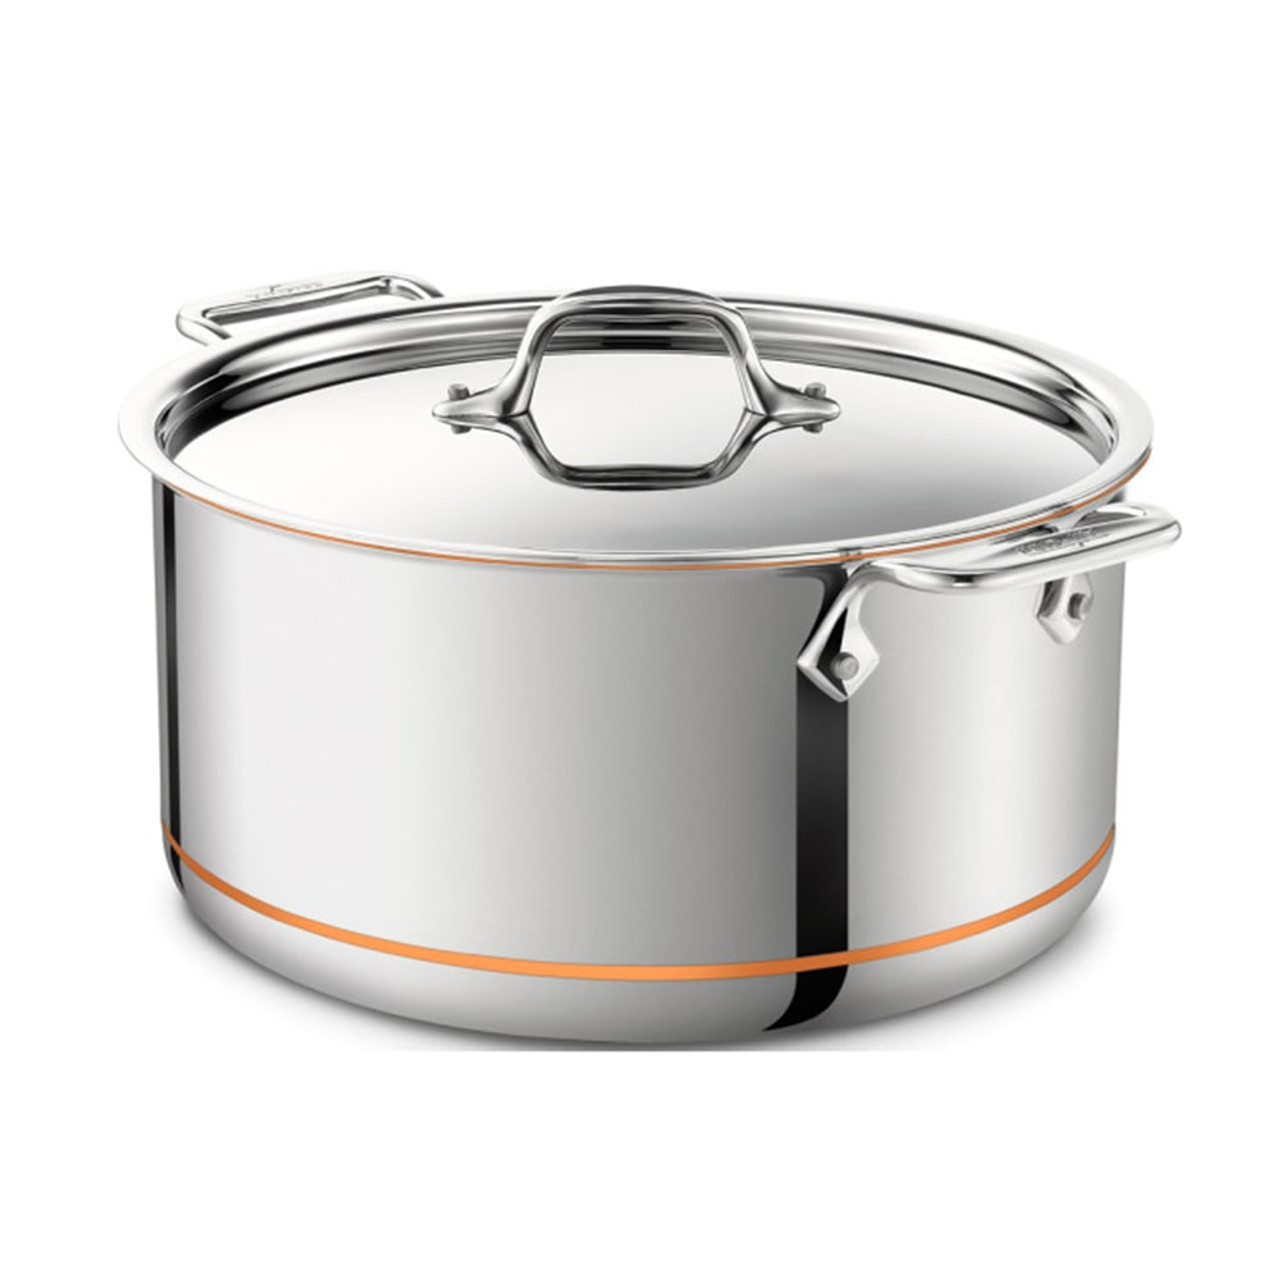 Cookware Set, All-Clad Copper Core 7-Piece Stainless Steel